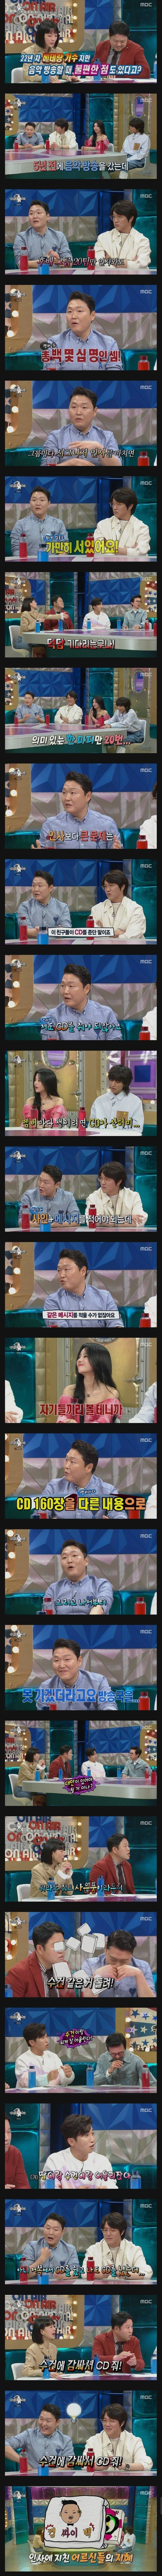 The reason why Psy is reluctant to go on music shows